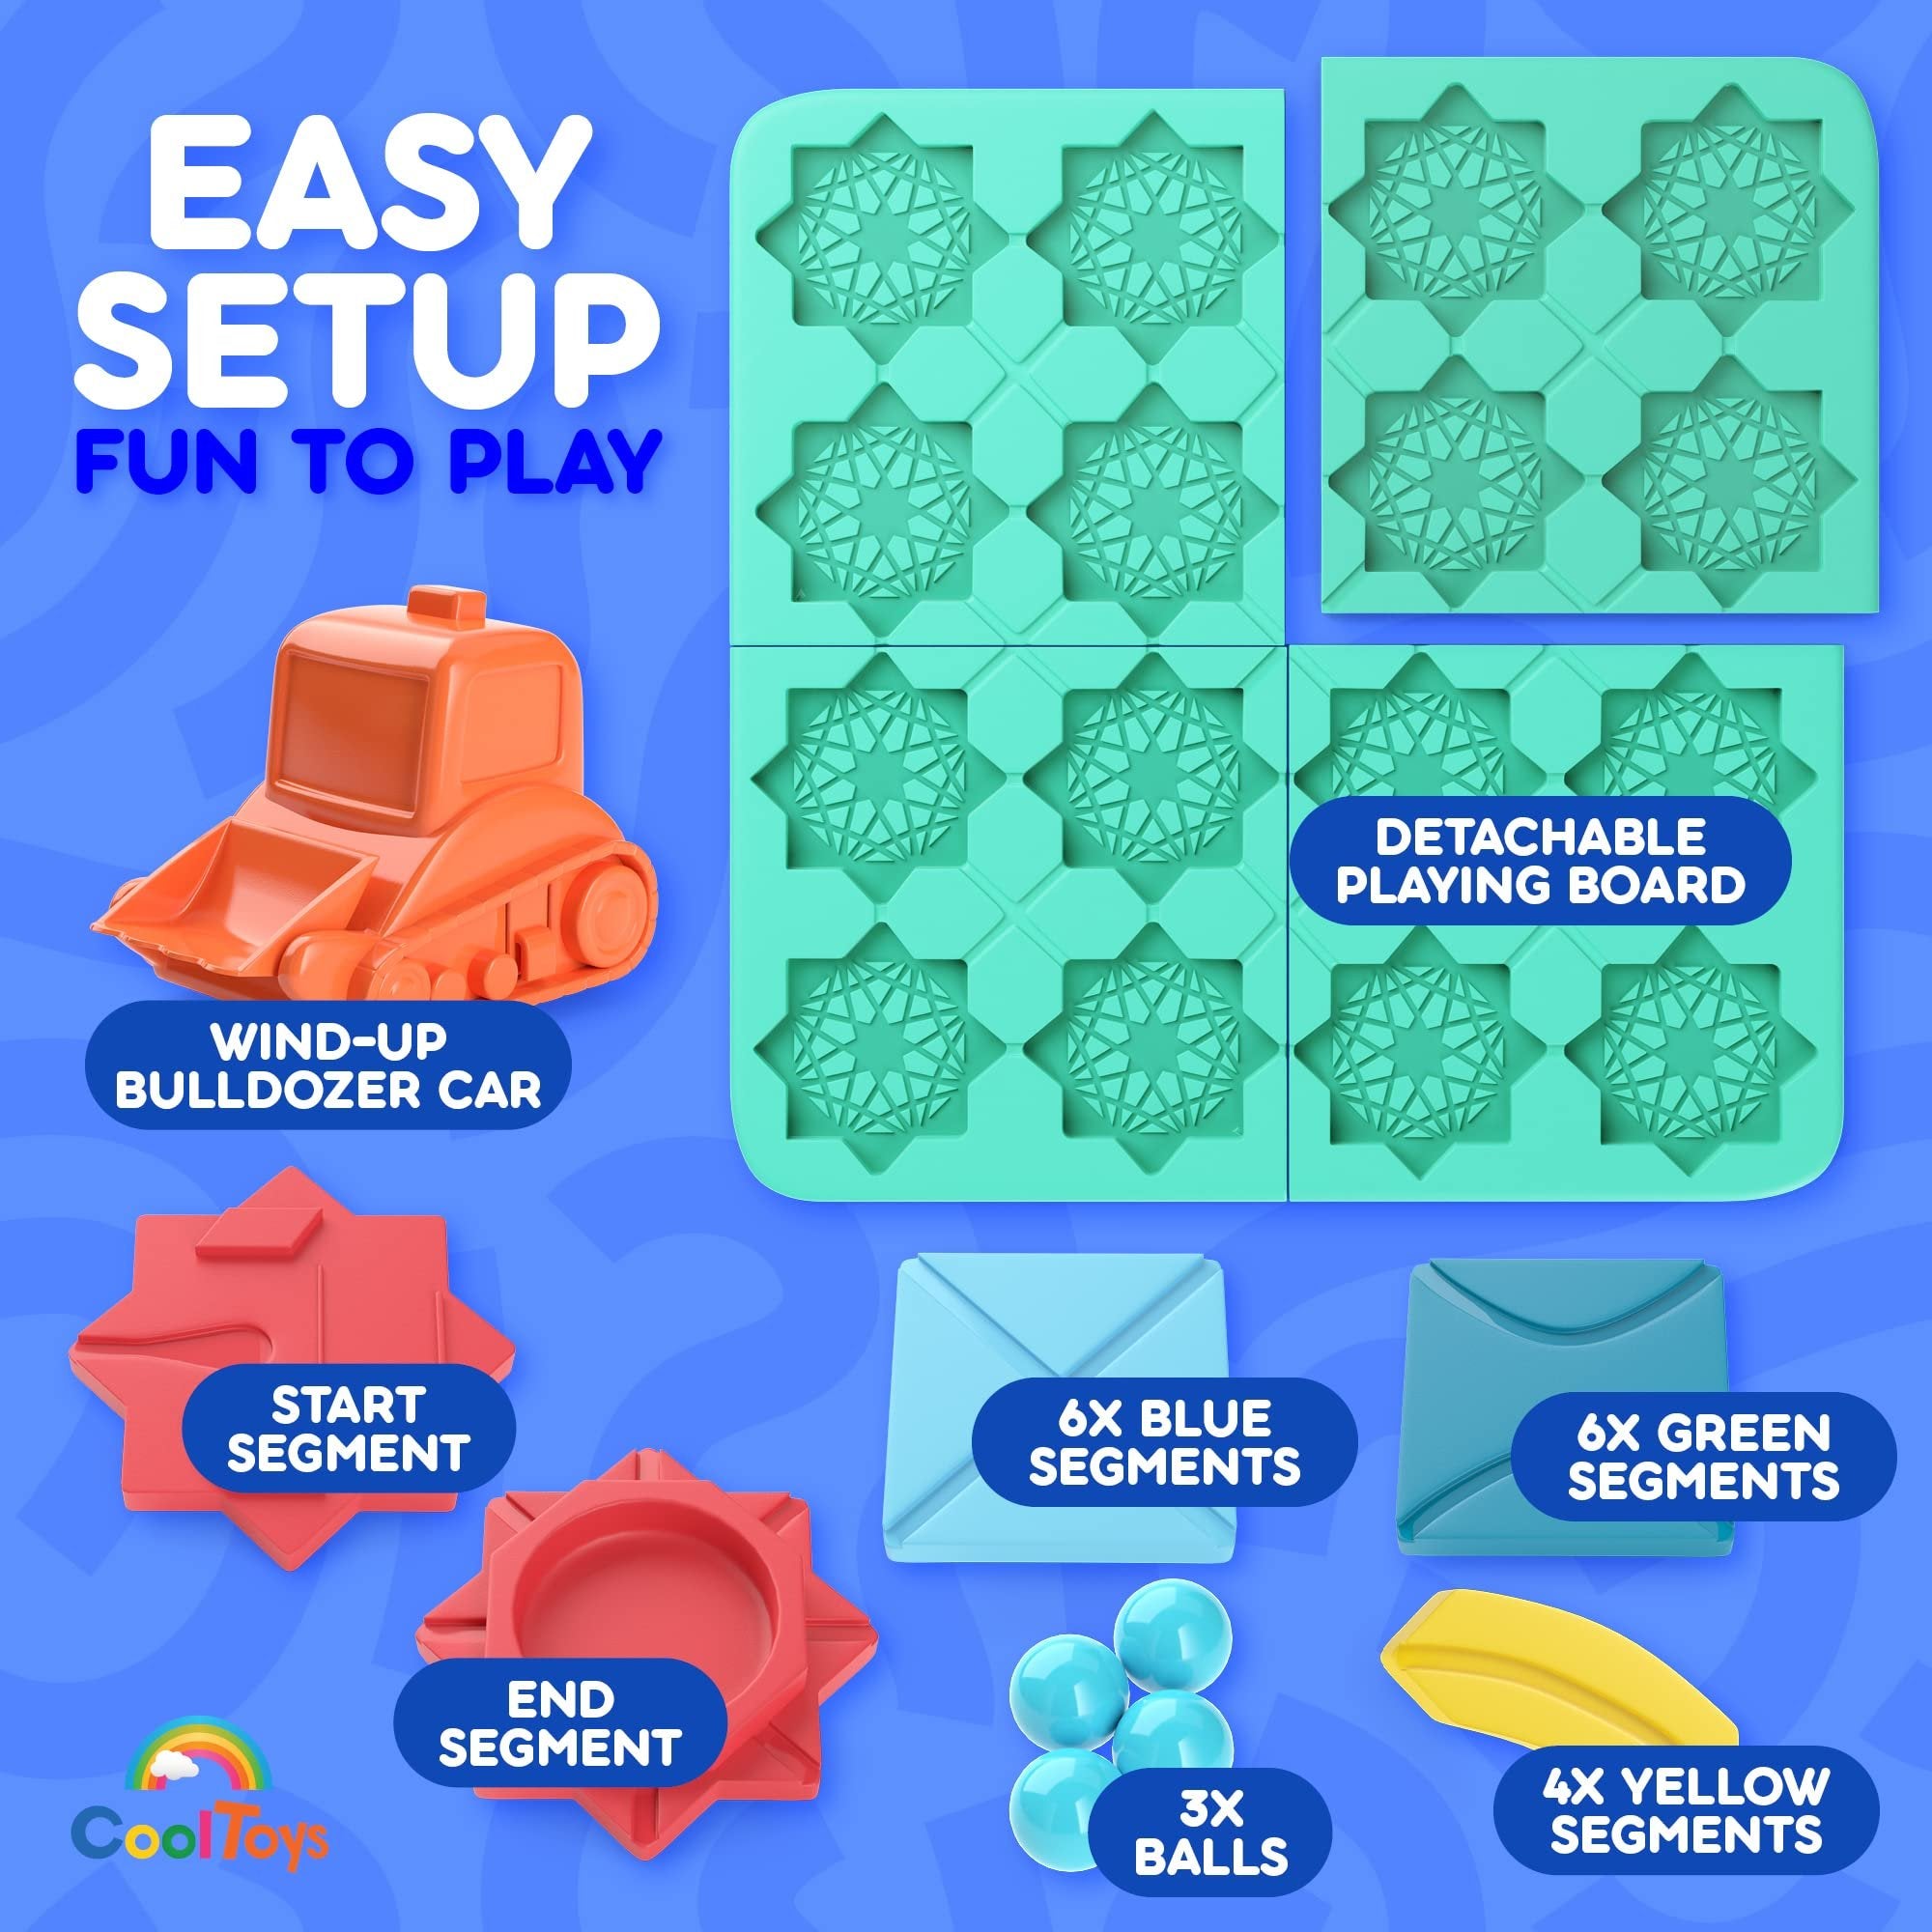 CoolToys Build-A-Track Brain Teaser Puzzles for Kids Ages 4-8 - Educational Smart Logic Board Game for Children, 4 Levels & 100+ Skill-Building Challenges, Fun Home & Travel Boys & Girls STEM Activity